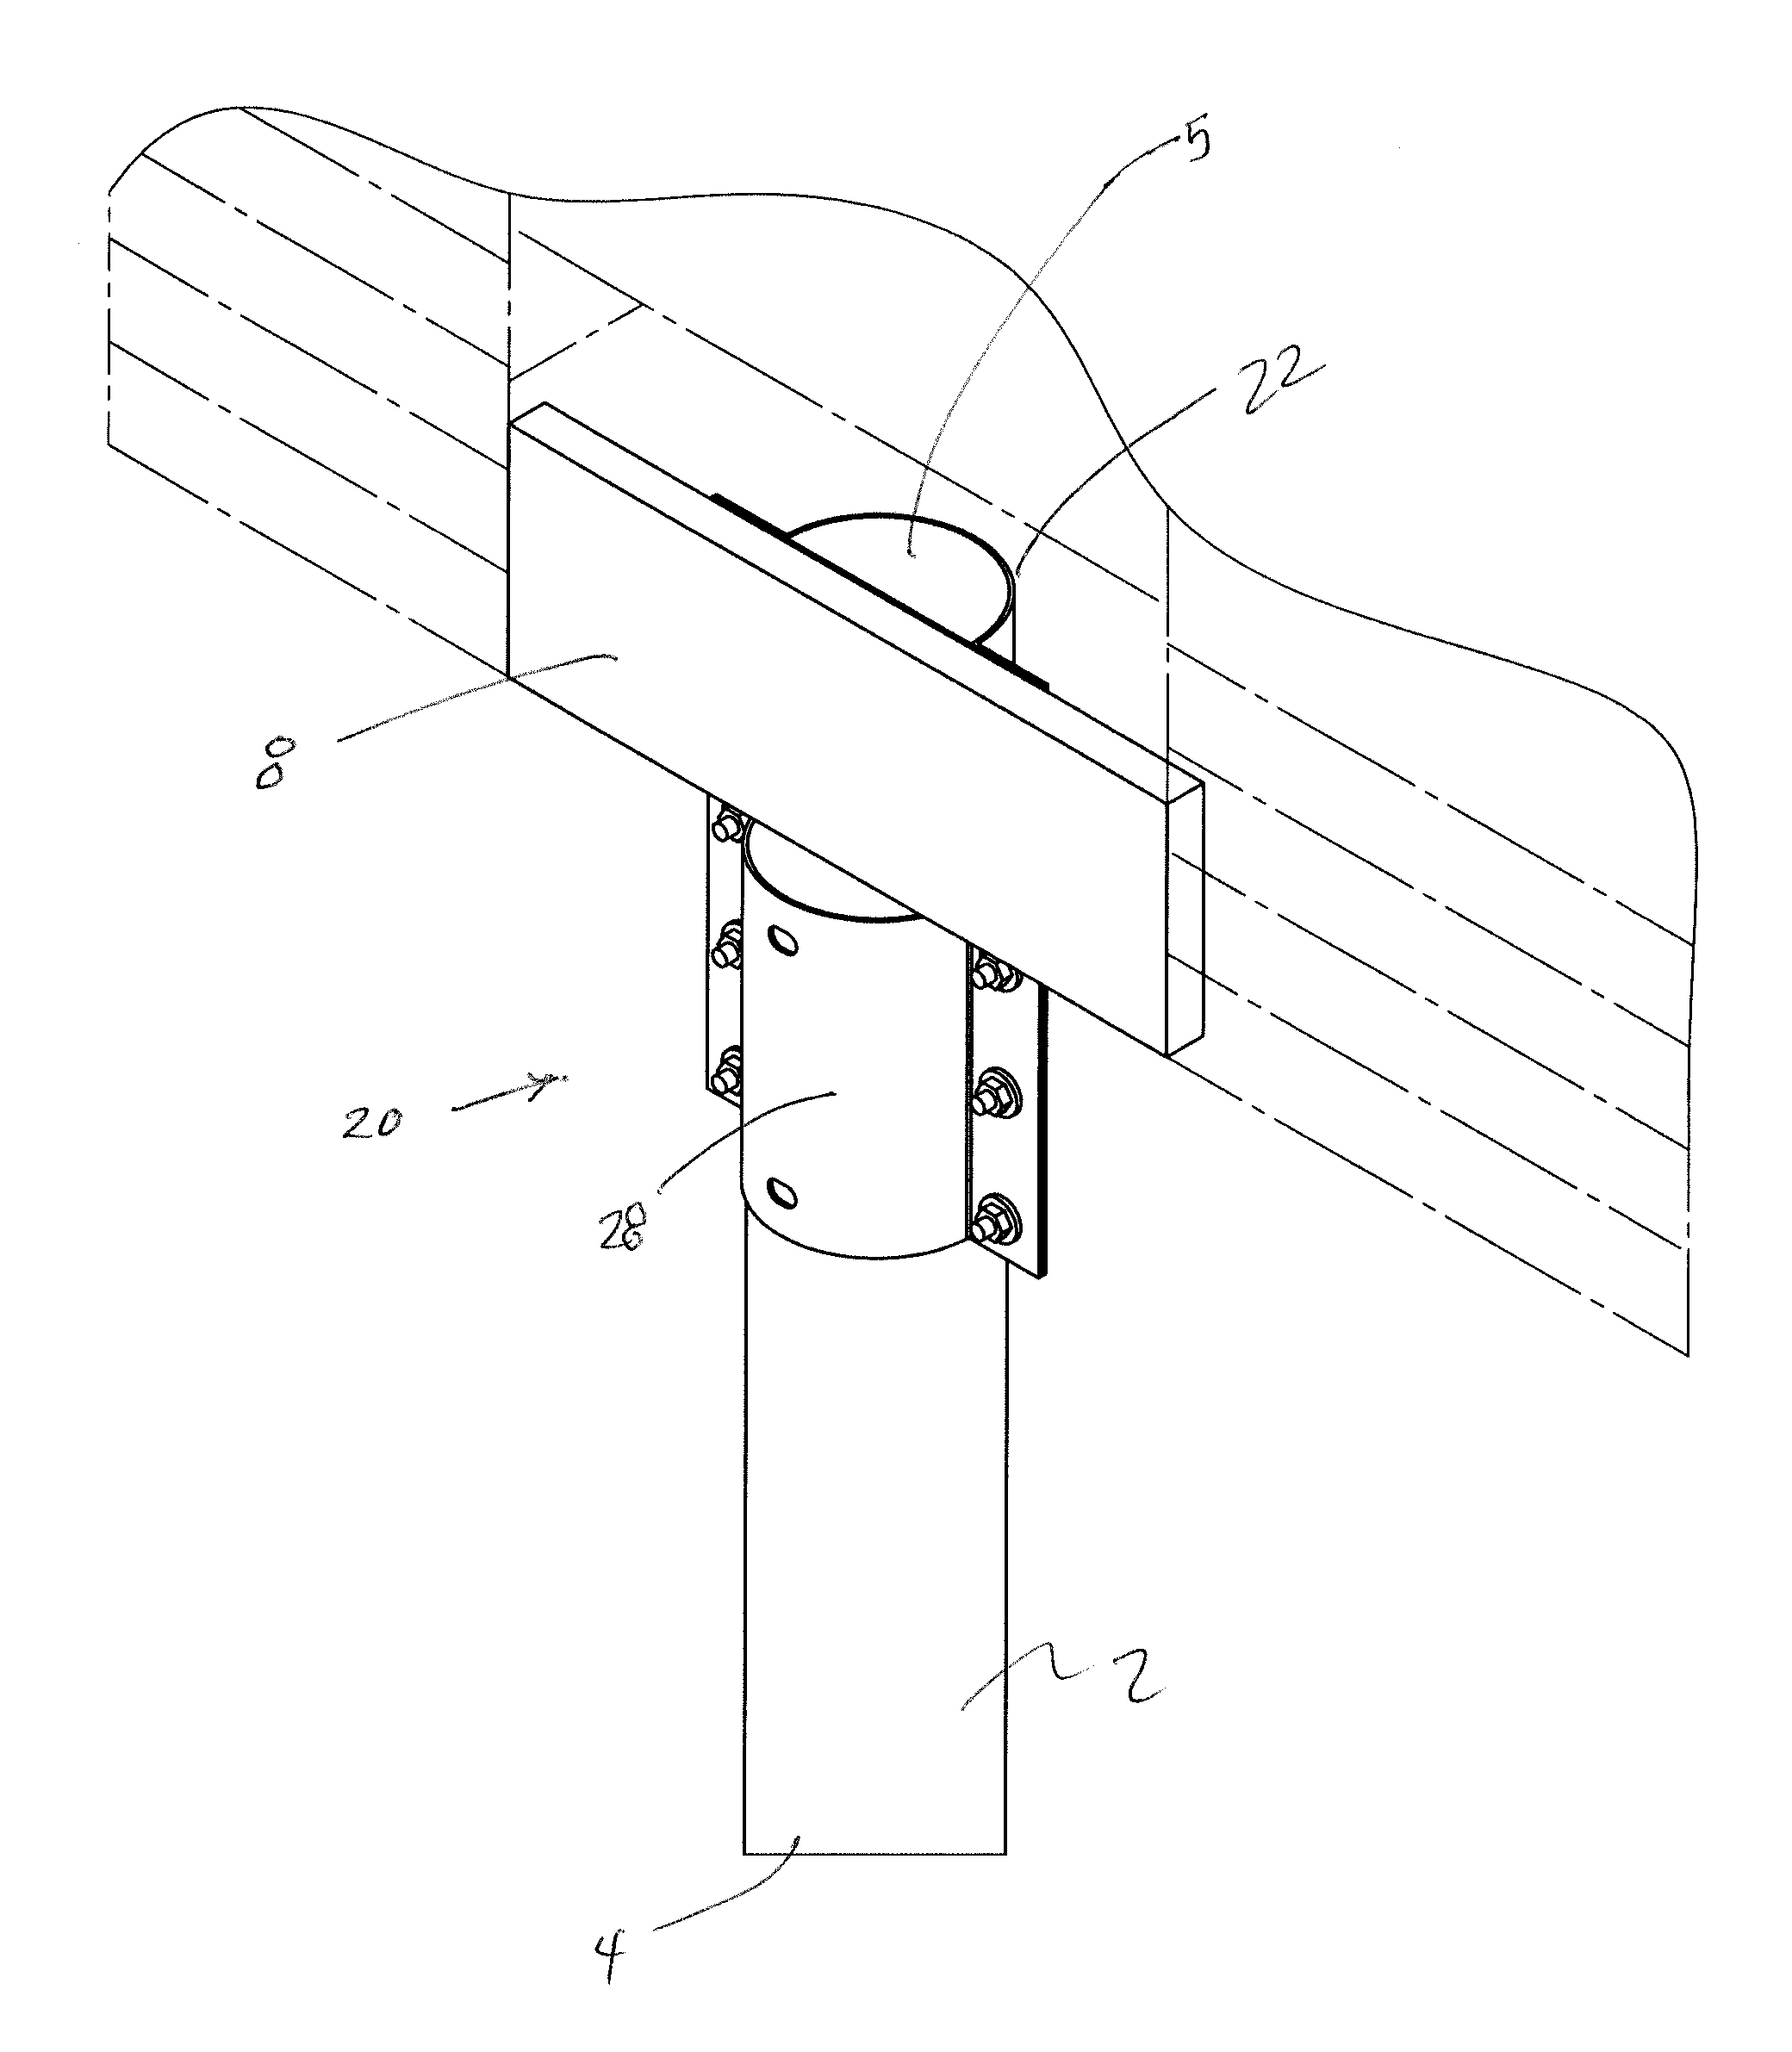 Foundation System and Method of Use for Decreasing the Effect of Wind and Flood Damage